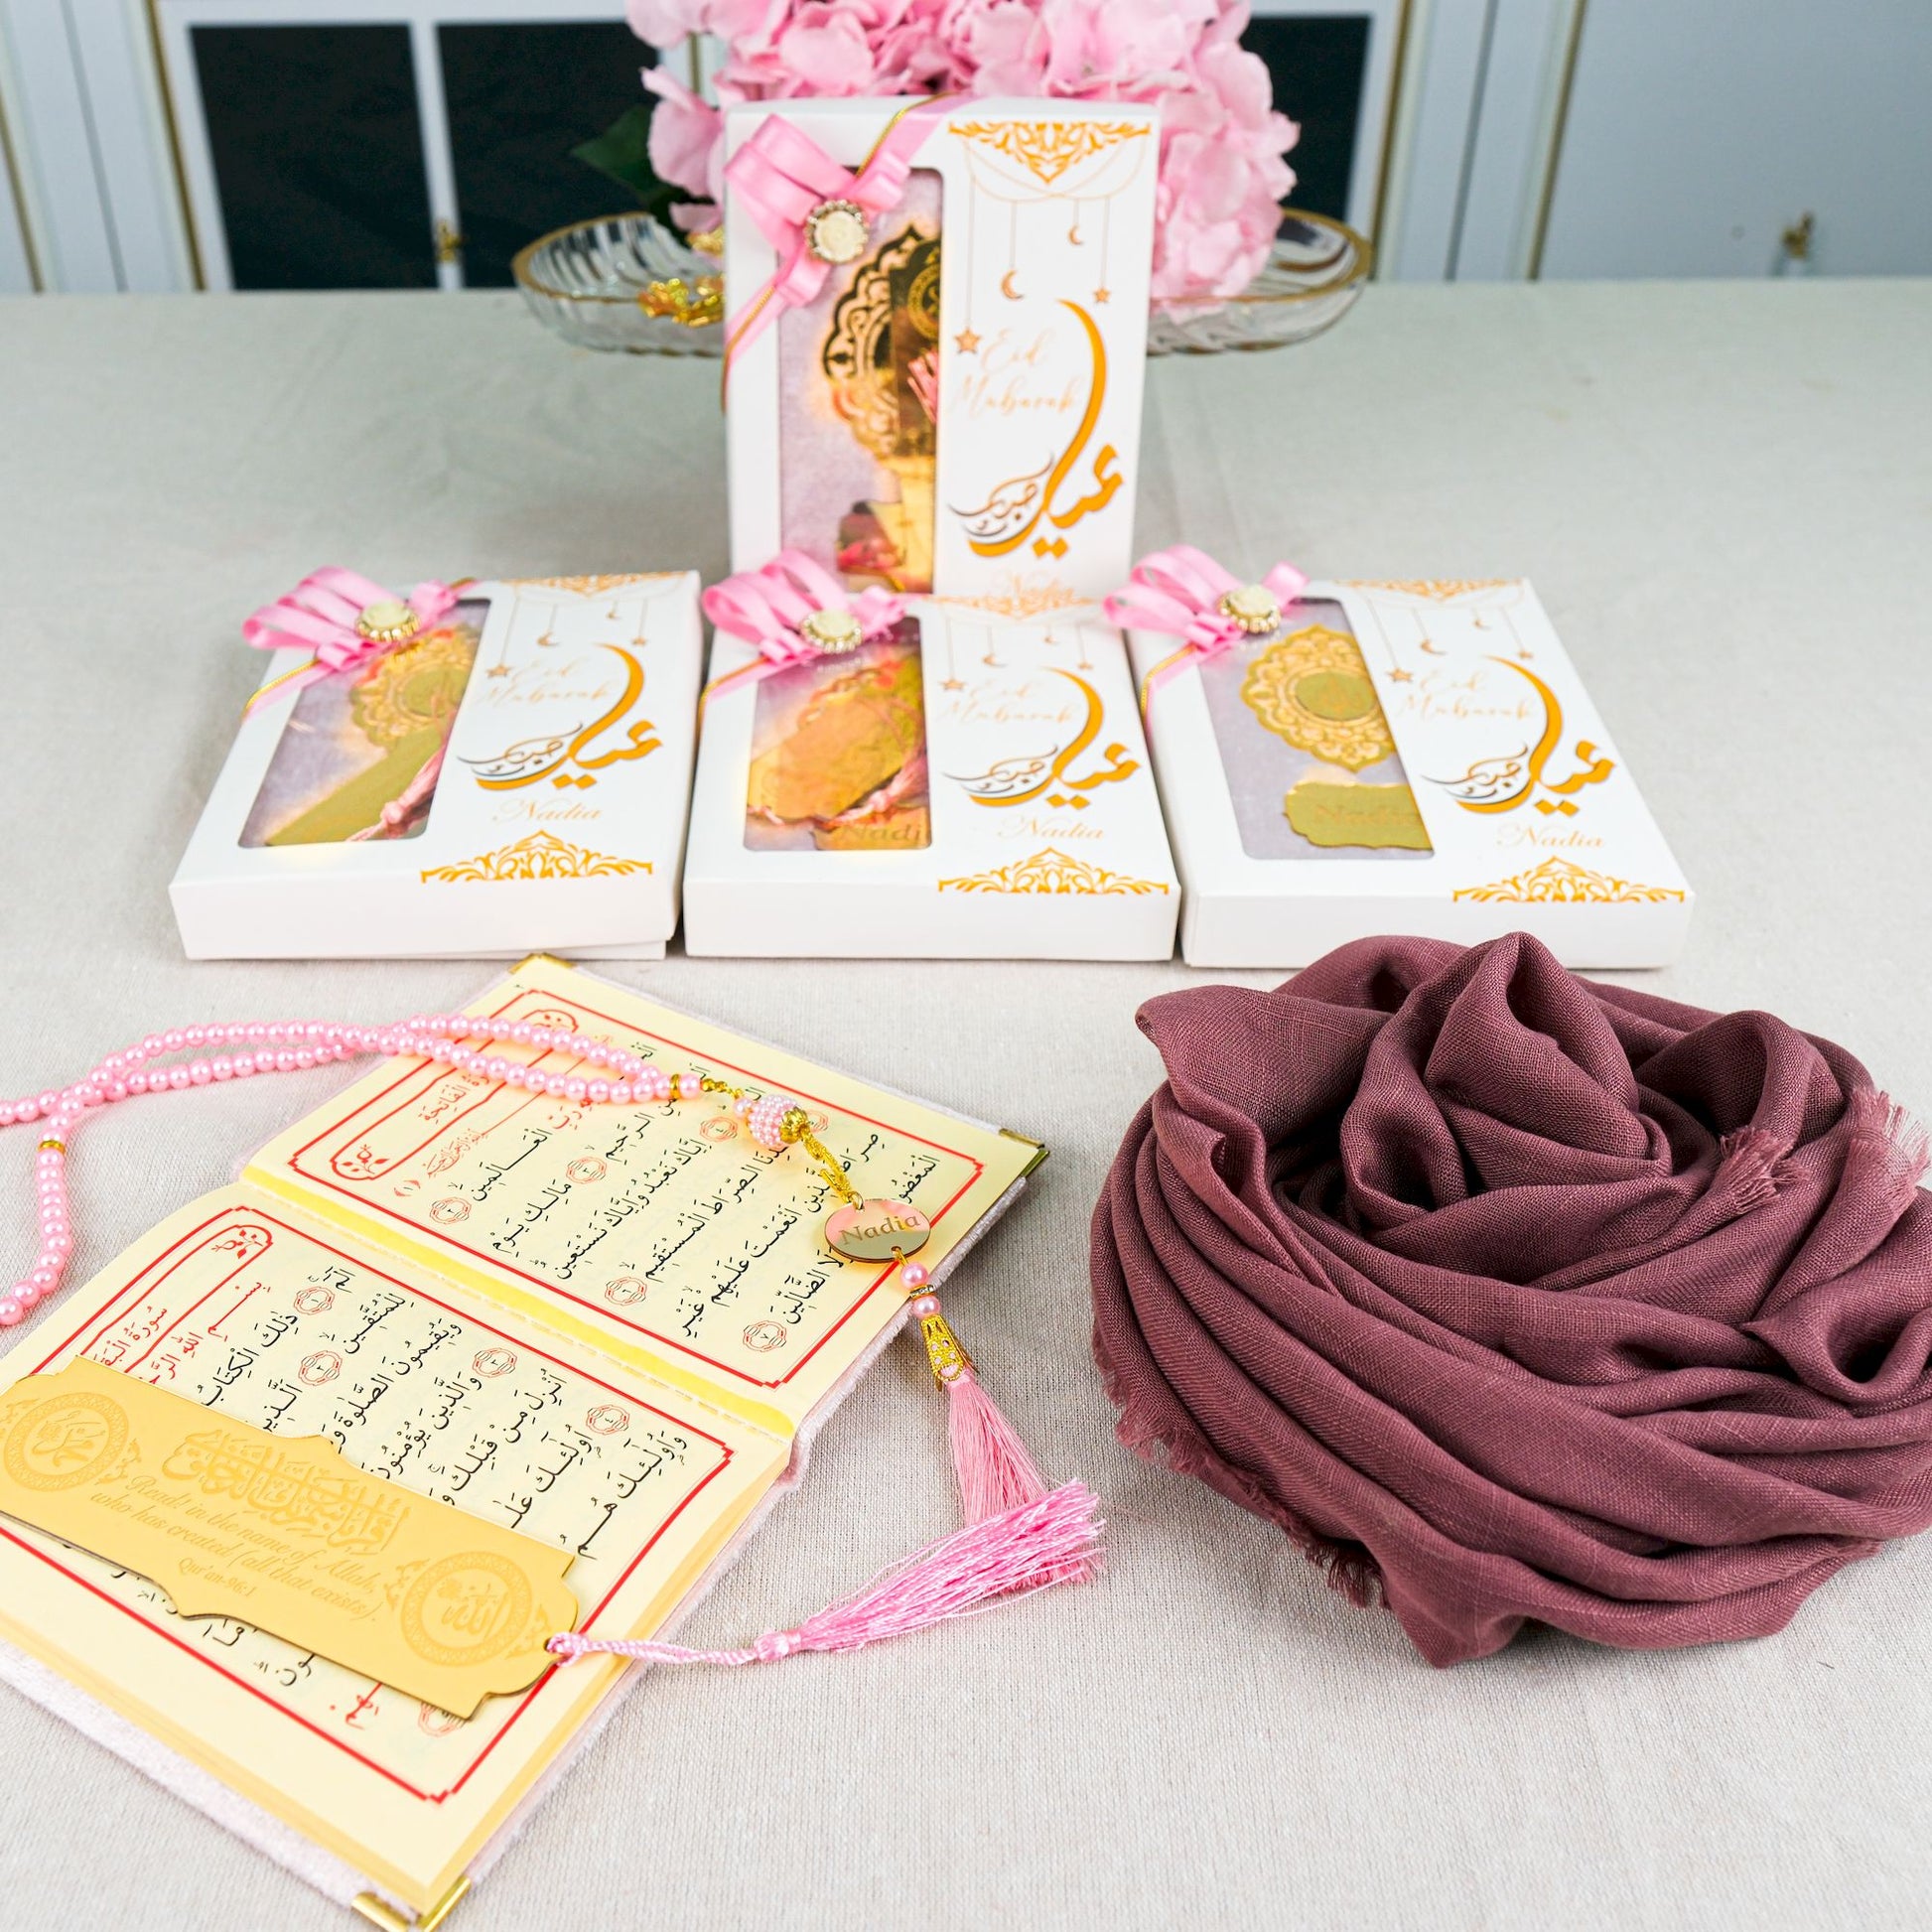 Personalized Yaseen Dua Book Hijab Bookmark Tasbeeh Ramadan Gift Set - Islamic Elite Favors is a handmade gift shop offering a wide variety of unique and personalized gifts for all occasions. Whether you're looking for the perfect Ramadan, Eid, Hajj, wedding gift or something special for a birthday, baby shower or anniversary, we have something for everyone. High quality, made with love.